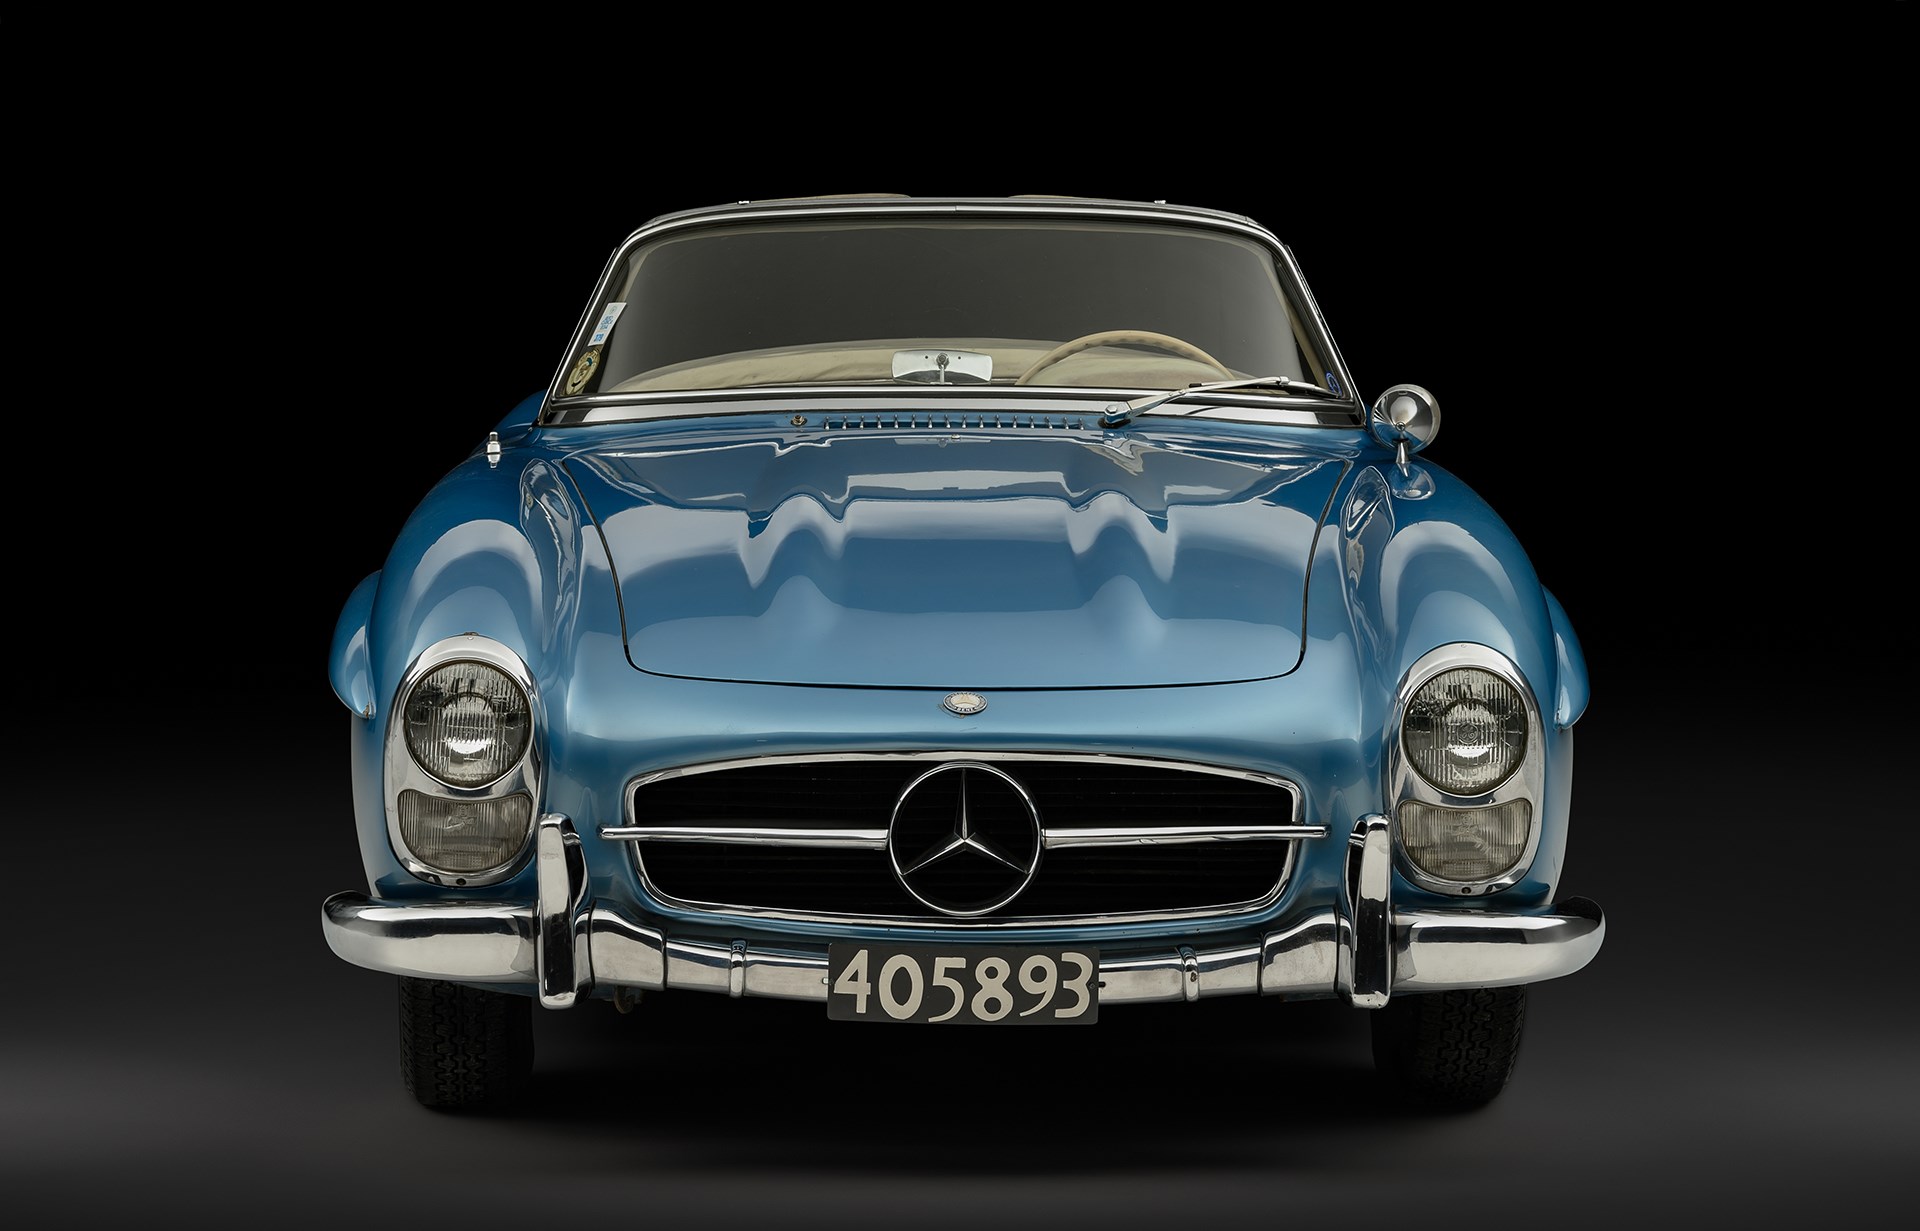 Front of Fangio's 1958 Mercedes-Benz 300 SL Roadster offered by RM Sotheby's Private Sales